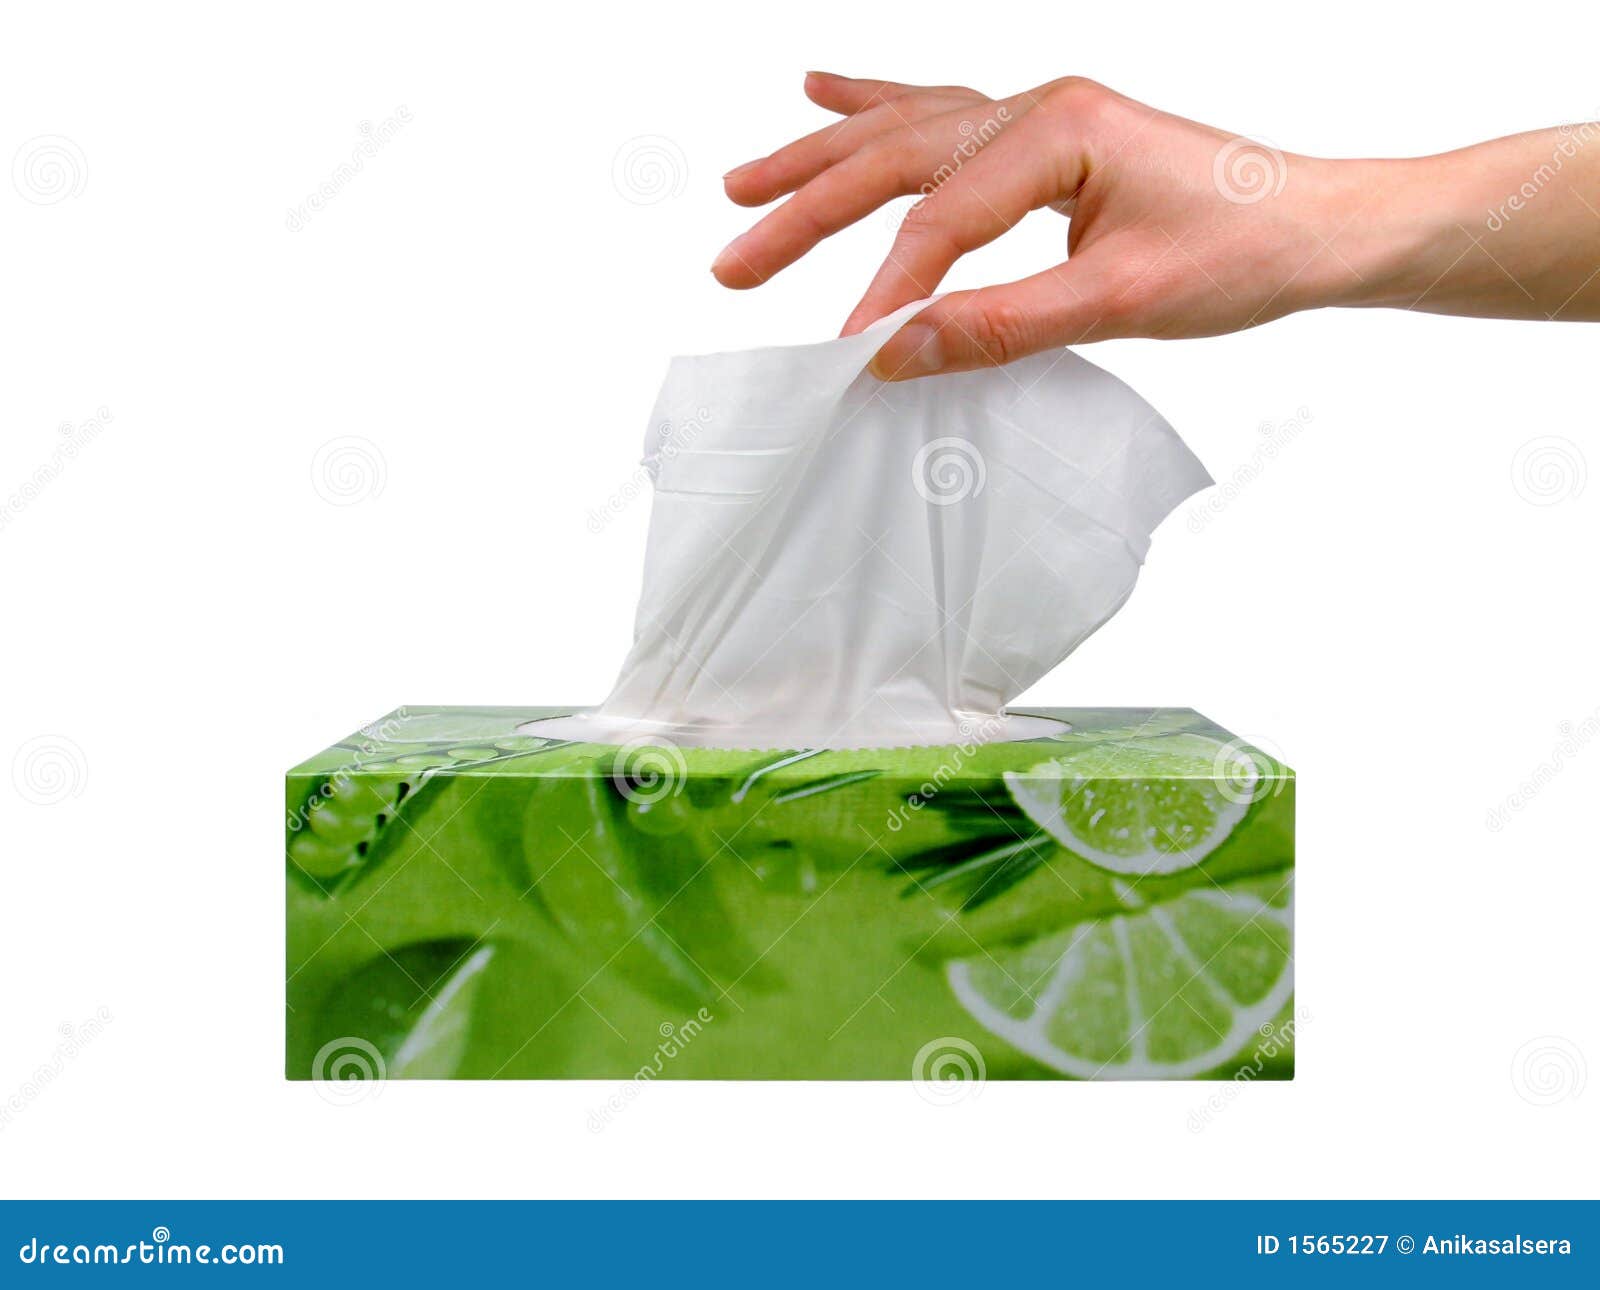 female hand taking a tissue from a box